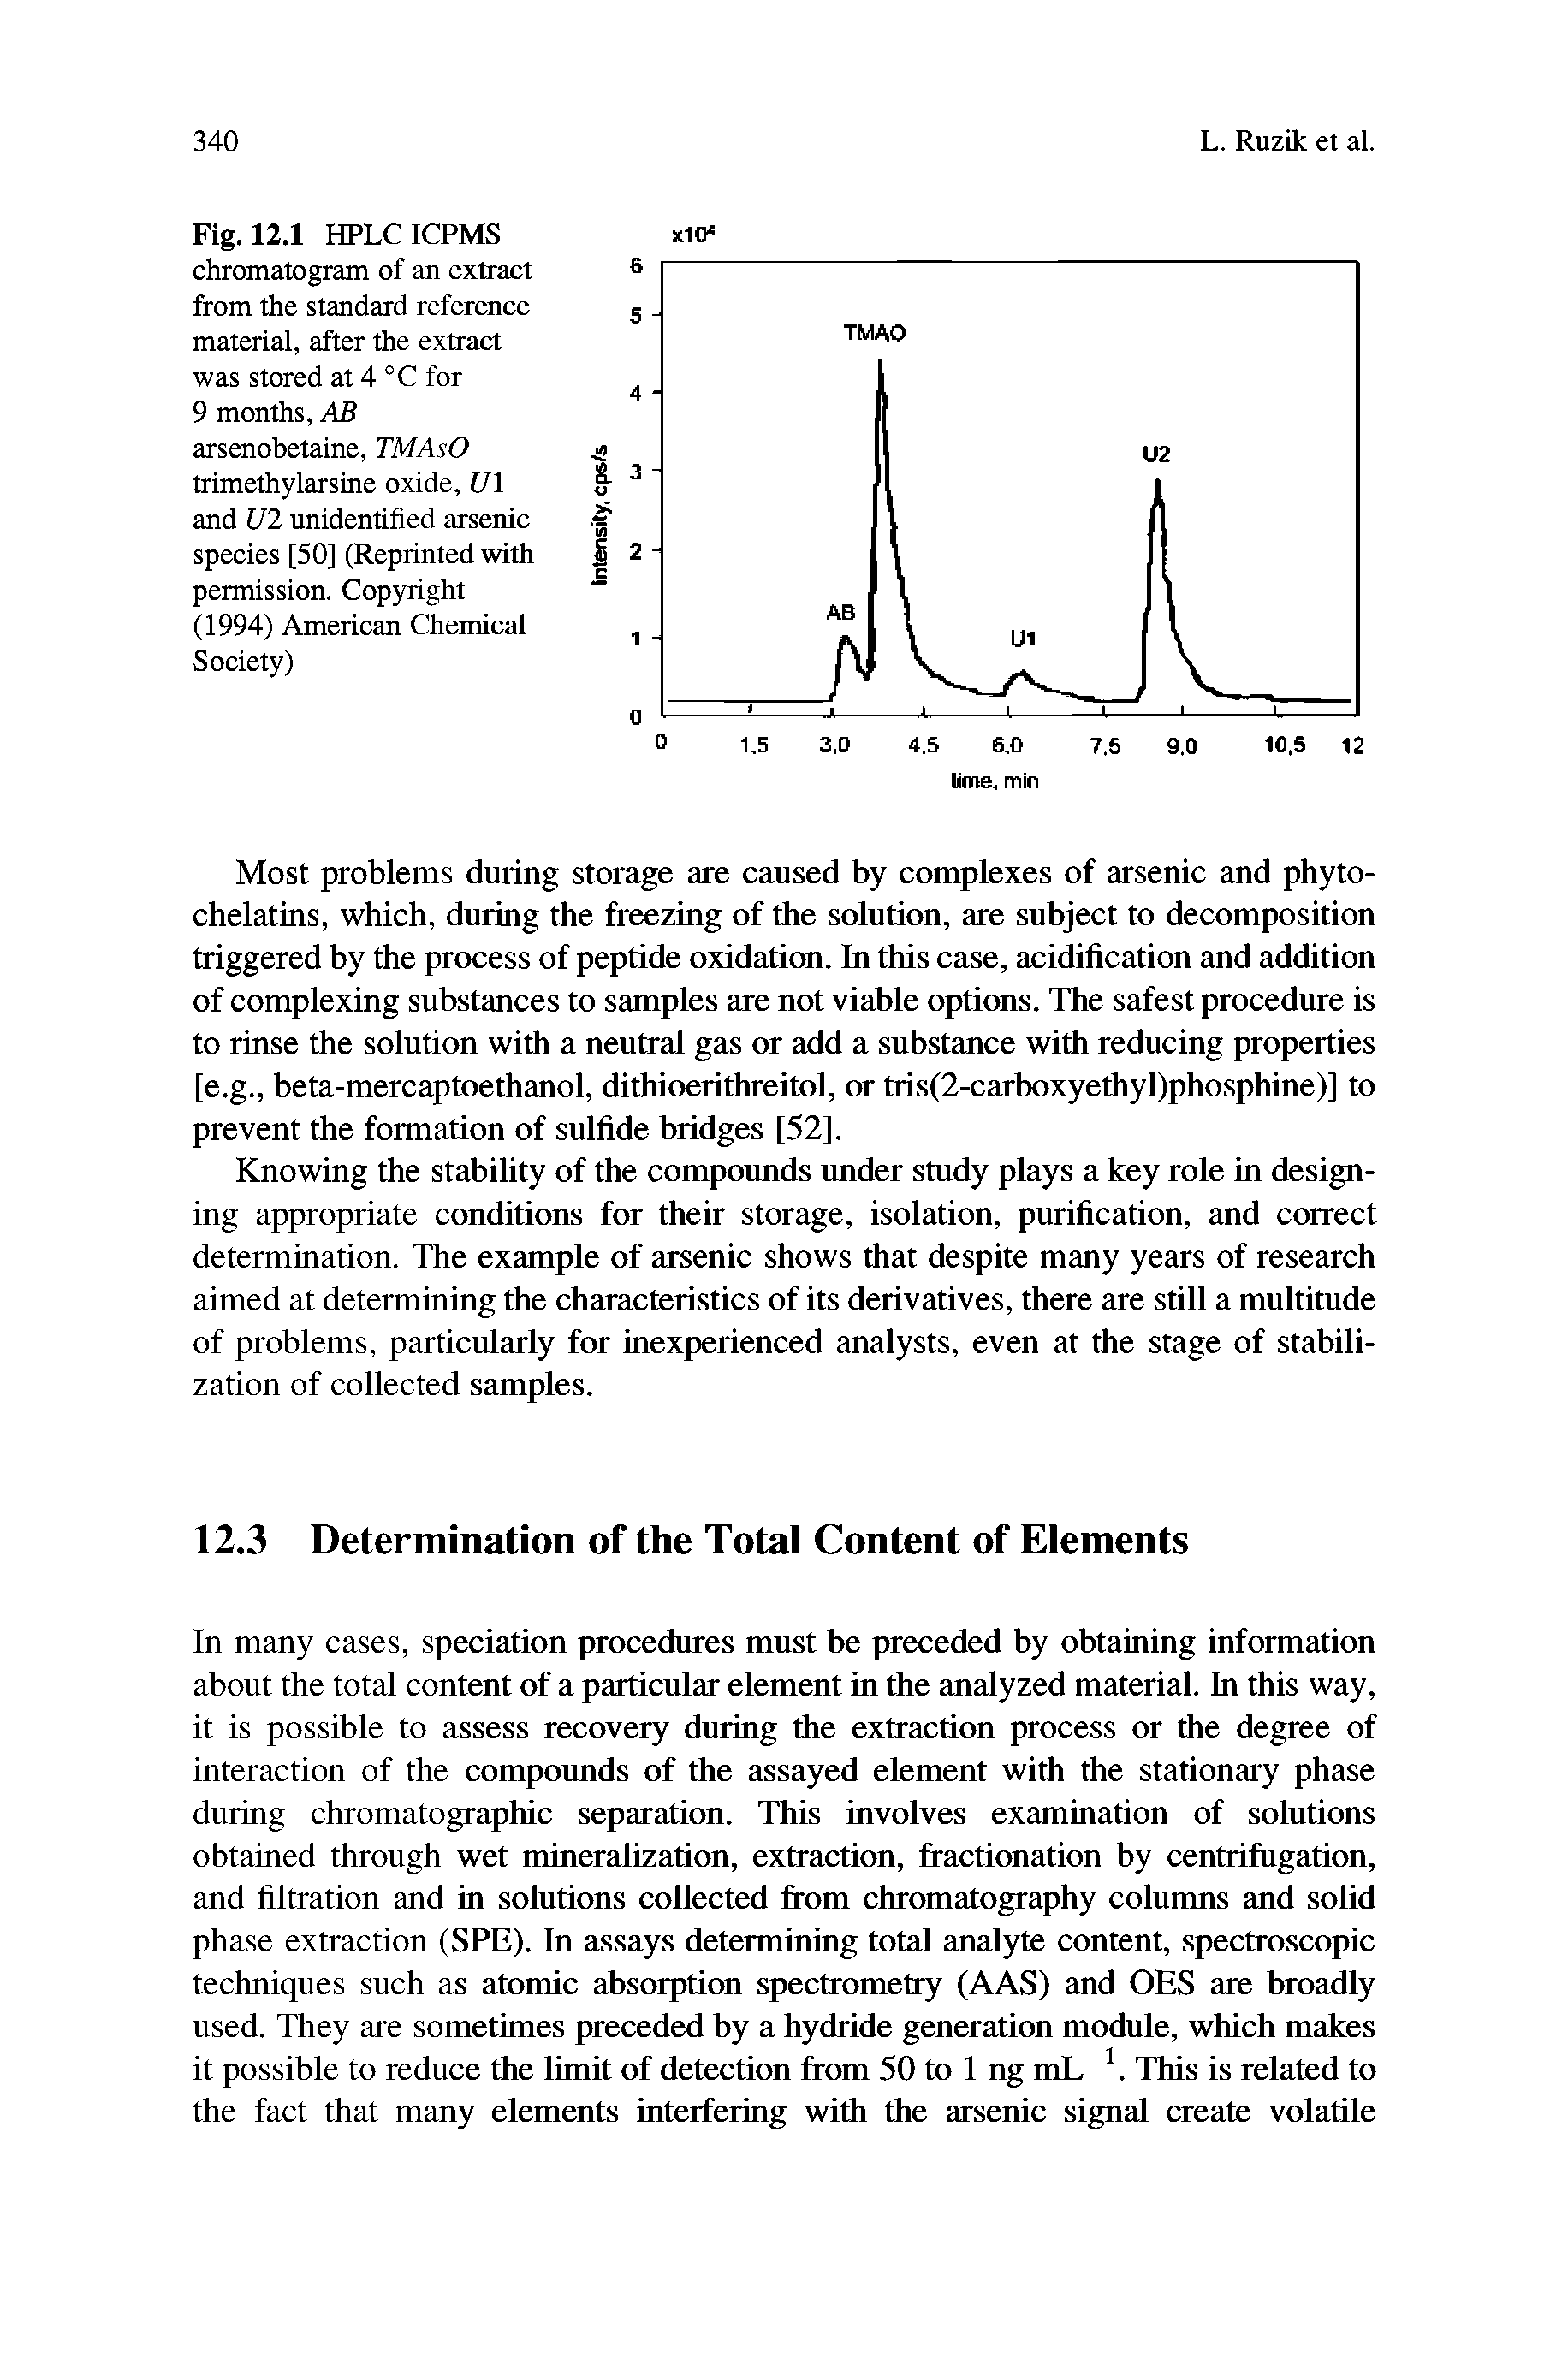 Fig. 12.1 HPLCICPMS chromatogram of an extract from the standard reference material, after the extract was stored at 4 °C for 9 months, AB arsenobetaine, TMAsO trimethylarsine oxide, U1 and U2 unidentified arsenic species [50] (Reprinted with permission. Copyright (1994) American Chemical Society)...